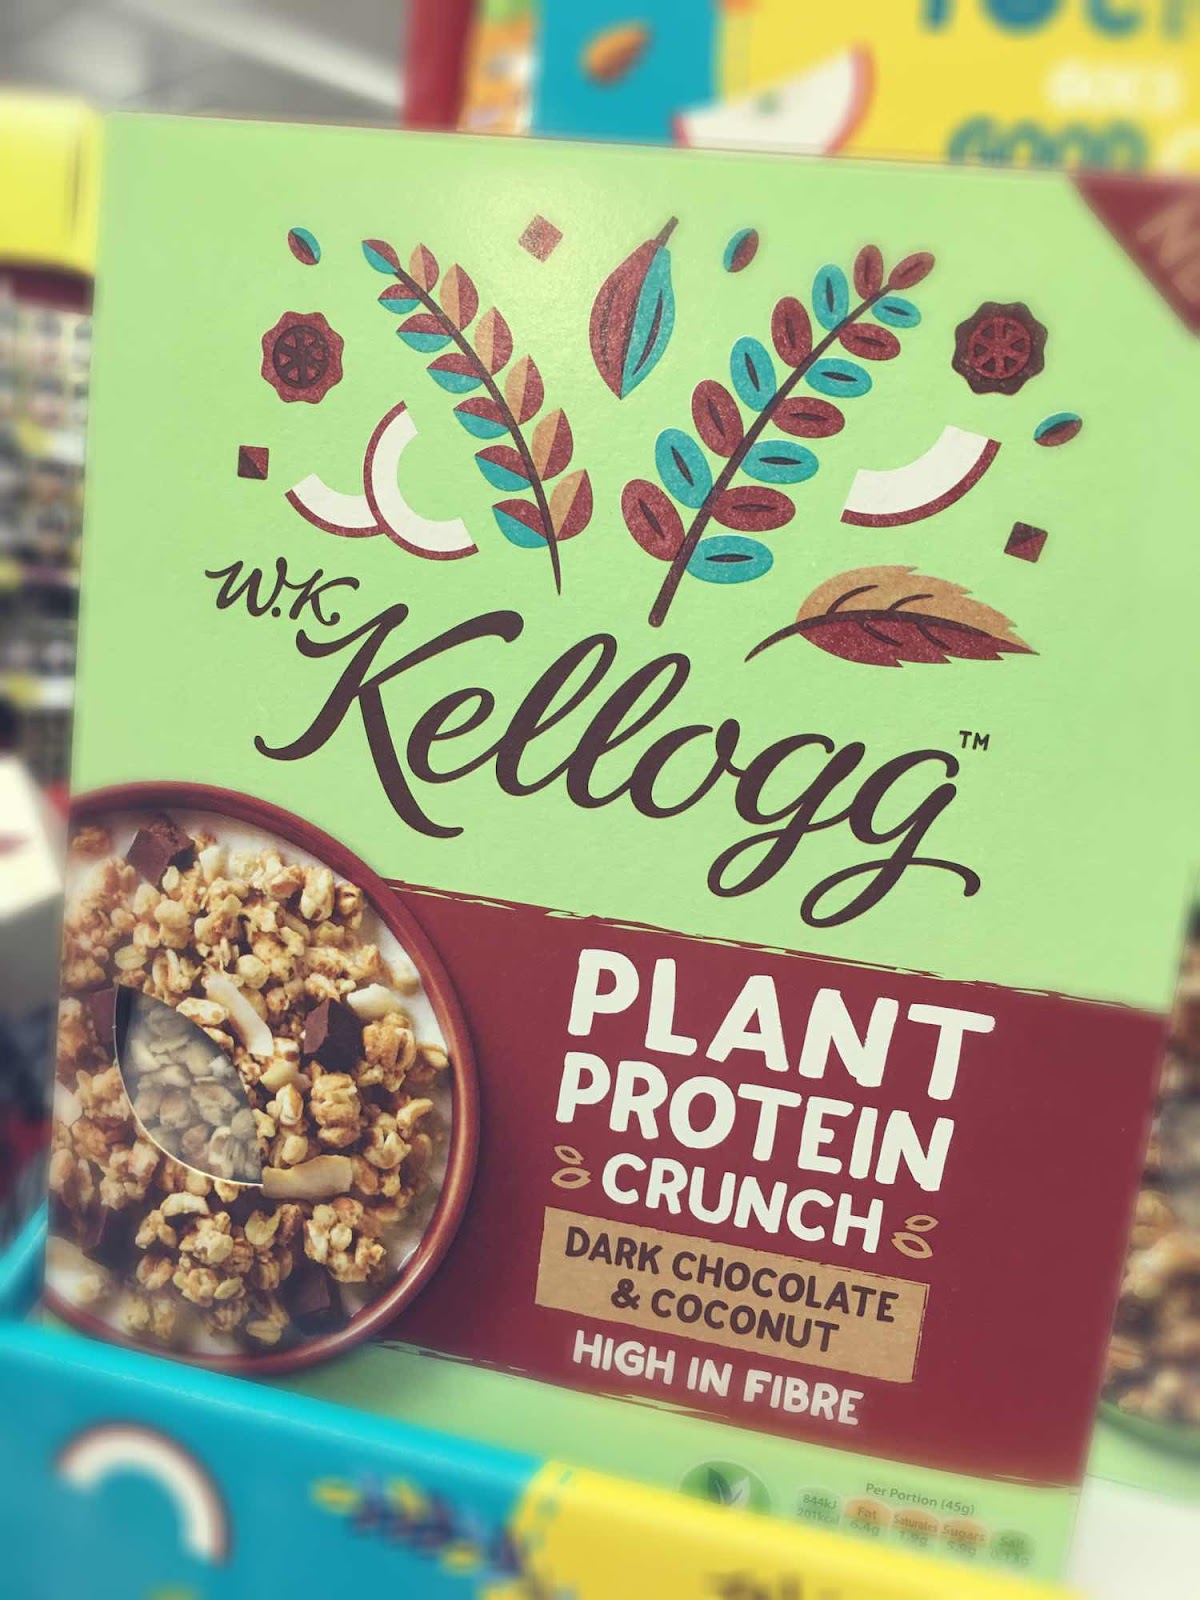 The Skinny Doll: Plant Protein Crunch from Kellogg's